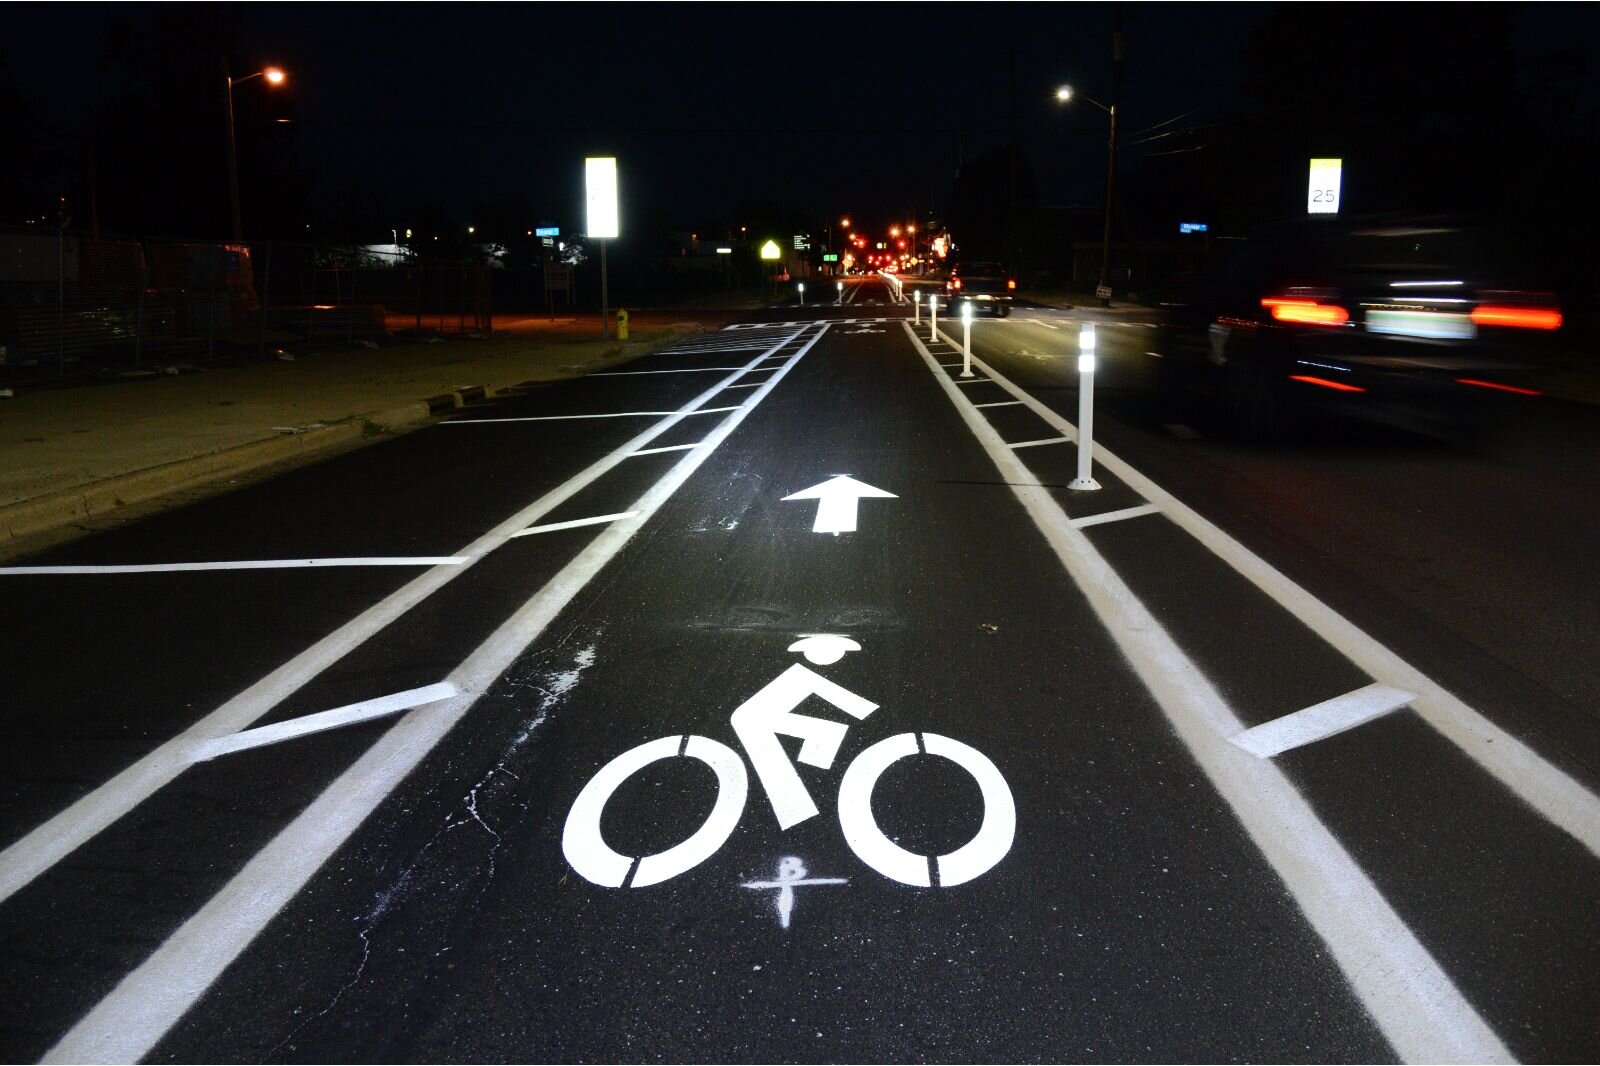 New posts, reflective at night, help keep traffic from swerving into the bike and parking lanes.